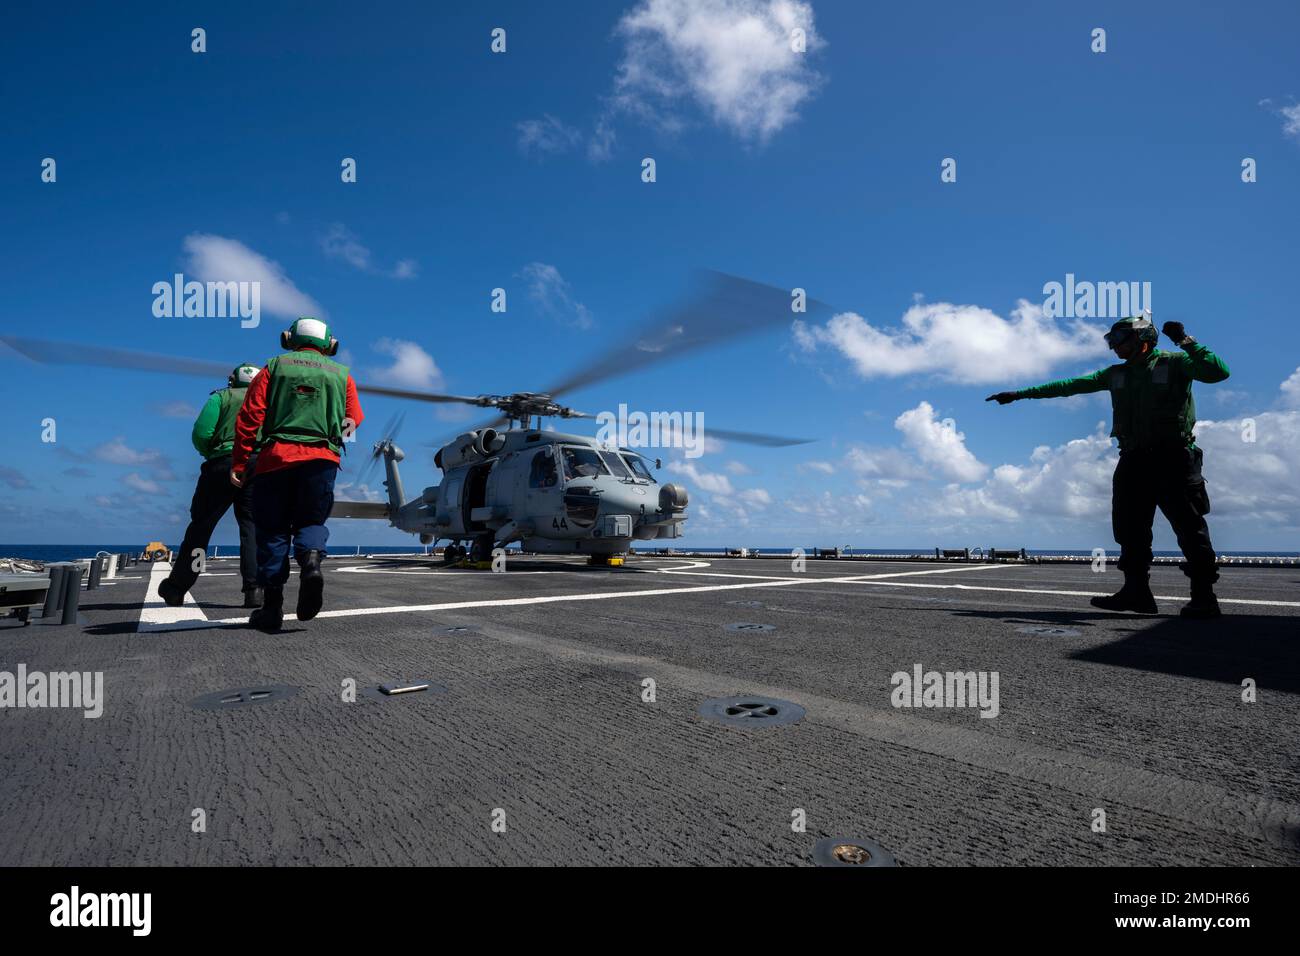 PACIFIC OCEAN (July 24, 2022) A U.S. Navy Sailor directs Navy and U.S. Coast Guard Sailors to a U.S. Navy MH-60R Seahawk helicopter during flight operations during Rim of the Pacific (RIMPAC) 2022. Twenty-six nations, 38 ships, three submarines, more than 170 aircraft and 25,000 personnel are participating in RIMPAC from June 29 to Aug. 4 in and around the Hawaiian Islands and Southern California. The worlds largest international maritime exercise, RIMPAC provides a unique training opportunity while fostering and sustaining cooperative relationships among participants critical to ensuring the Stock Photo